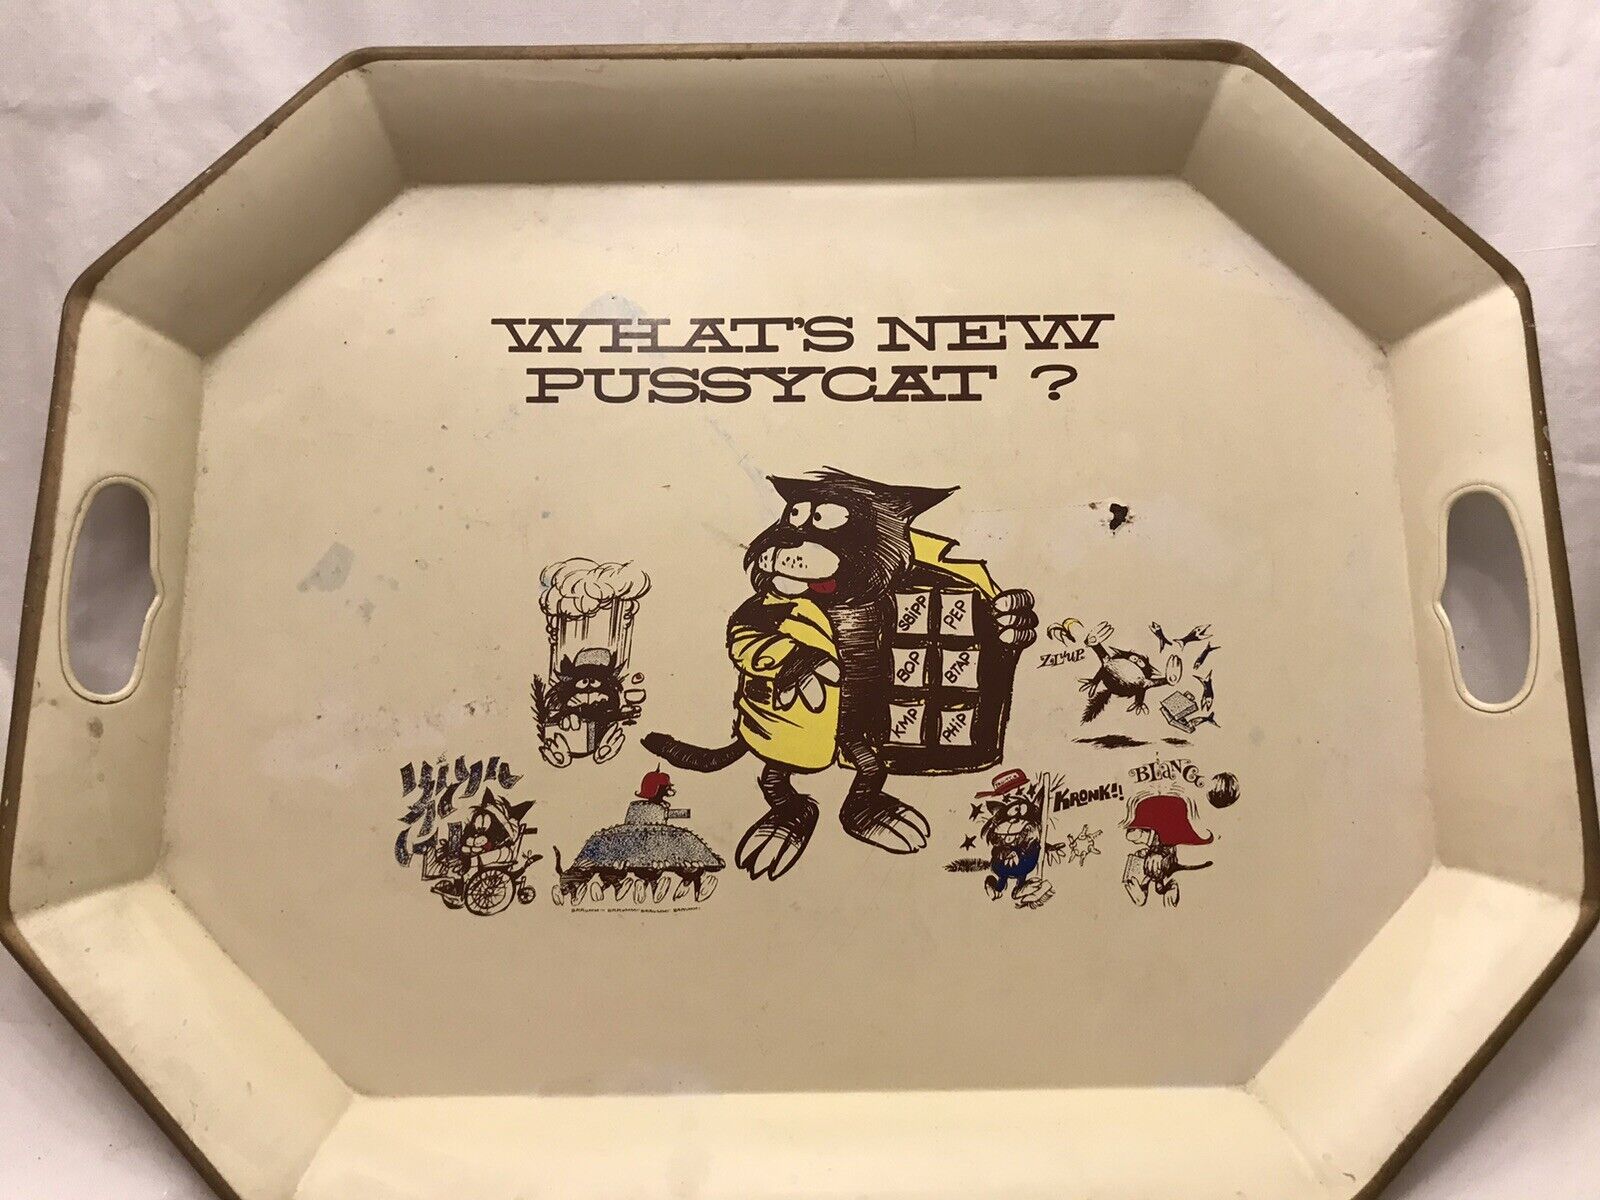 1966 WHAT’S NEW PUSSYCAT? AETNA LIFE&CASUALTY AWARD TRAY METAL/ENAMEL- 20”X16”